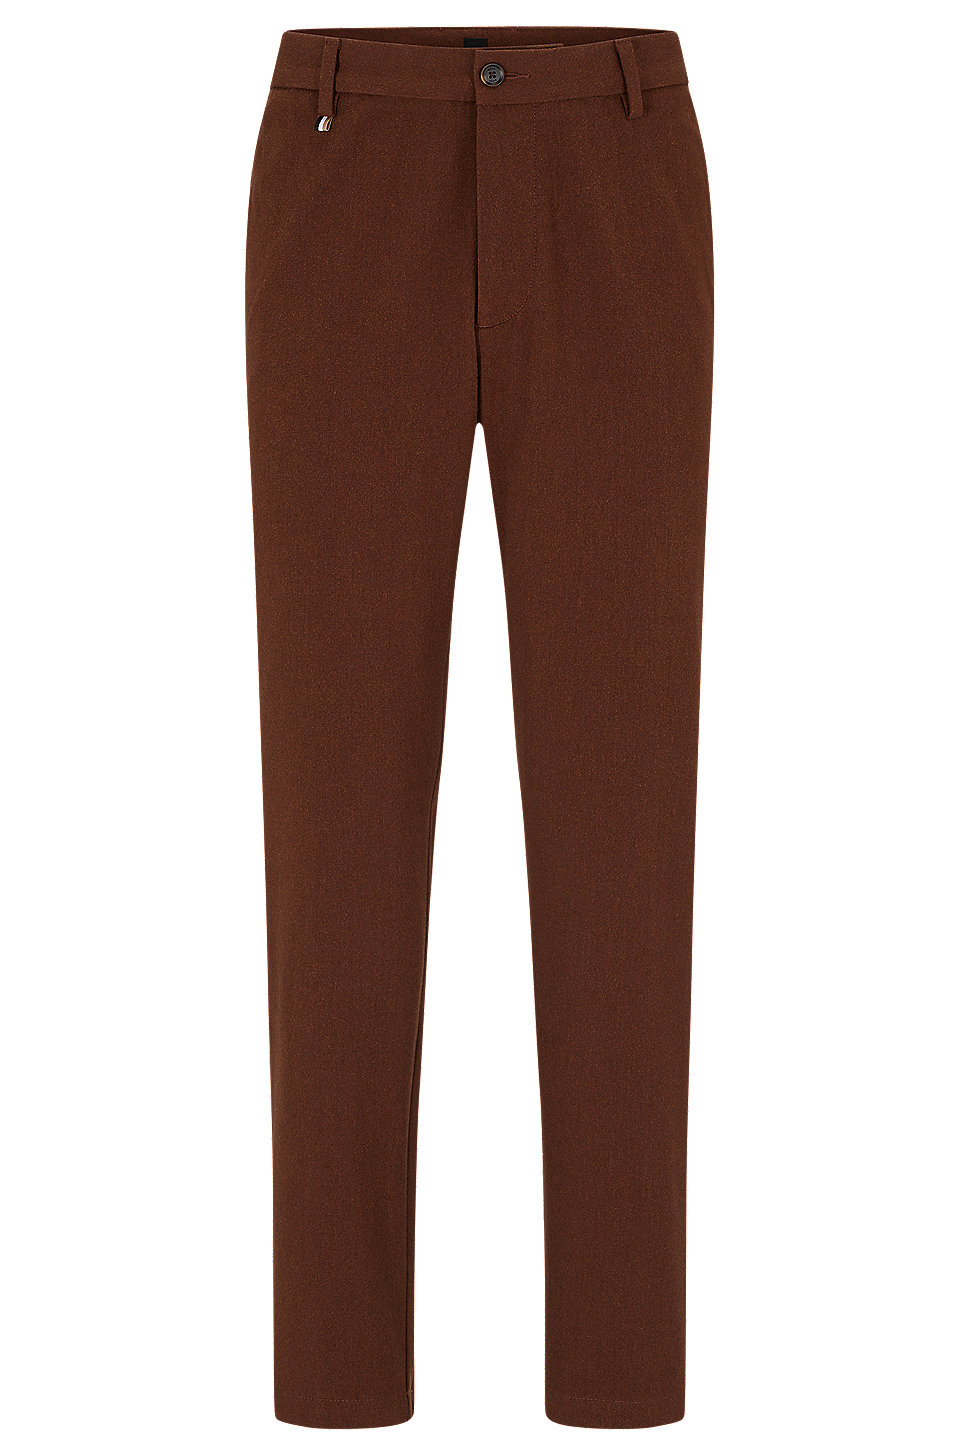 BOSS - Slim-fit trousers in micro-patterned stretch fabric